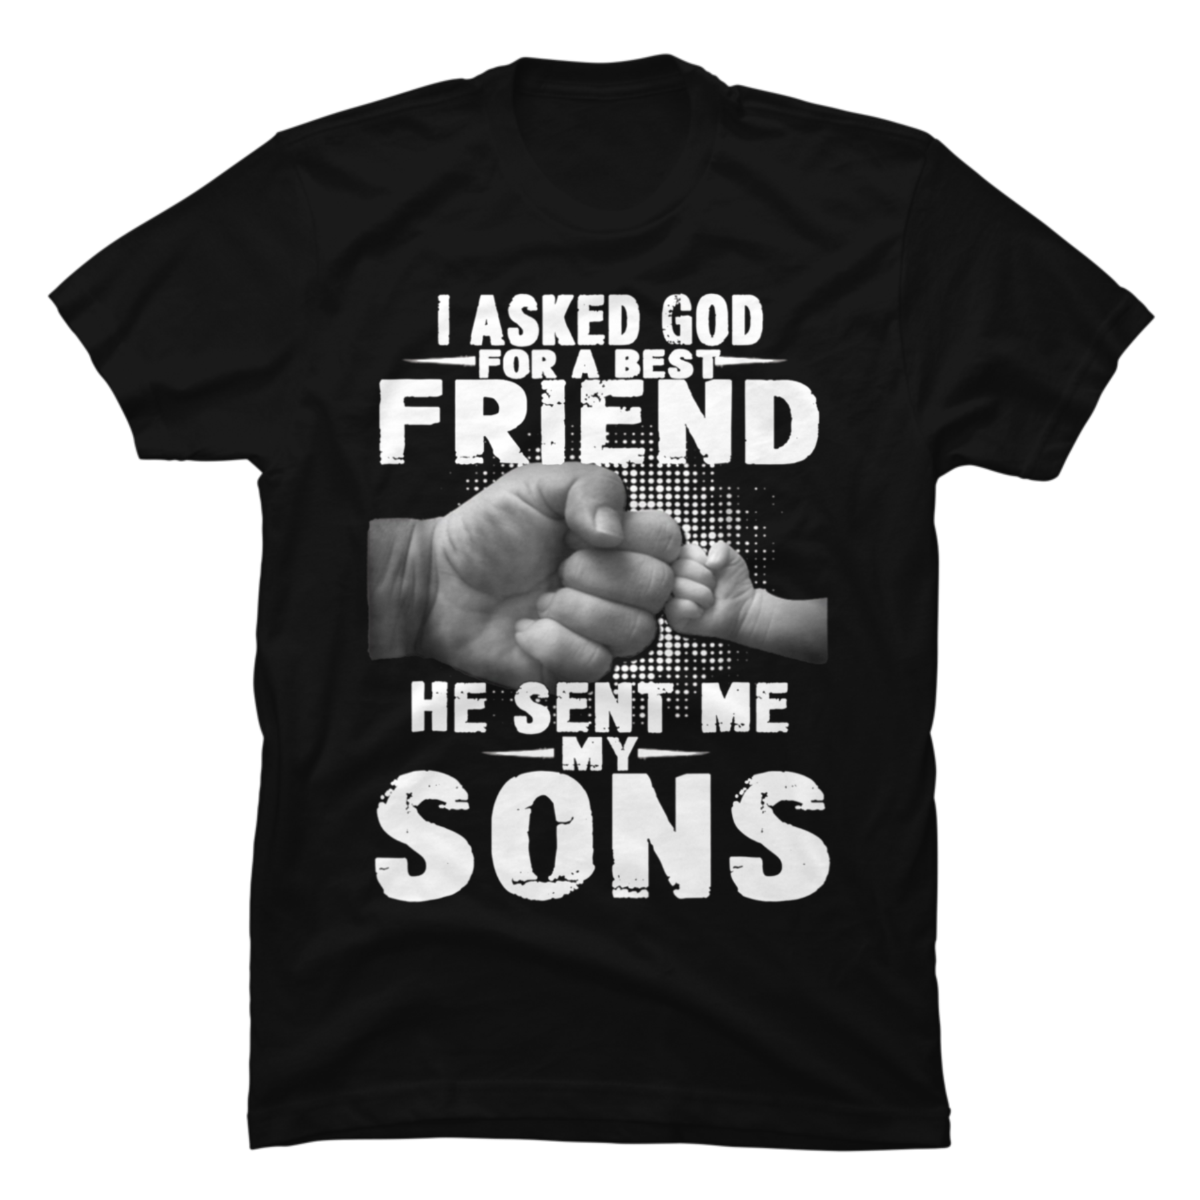 i asked god for a best friend he sent me my son shirt - Buy t-shirt designs